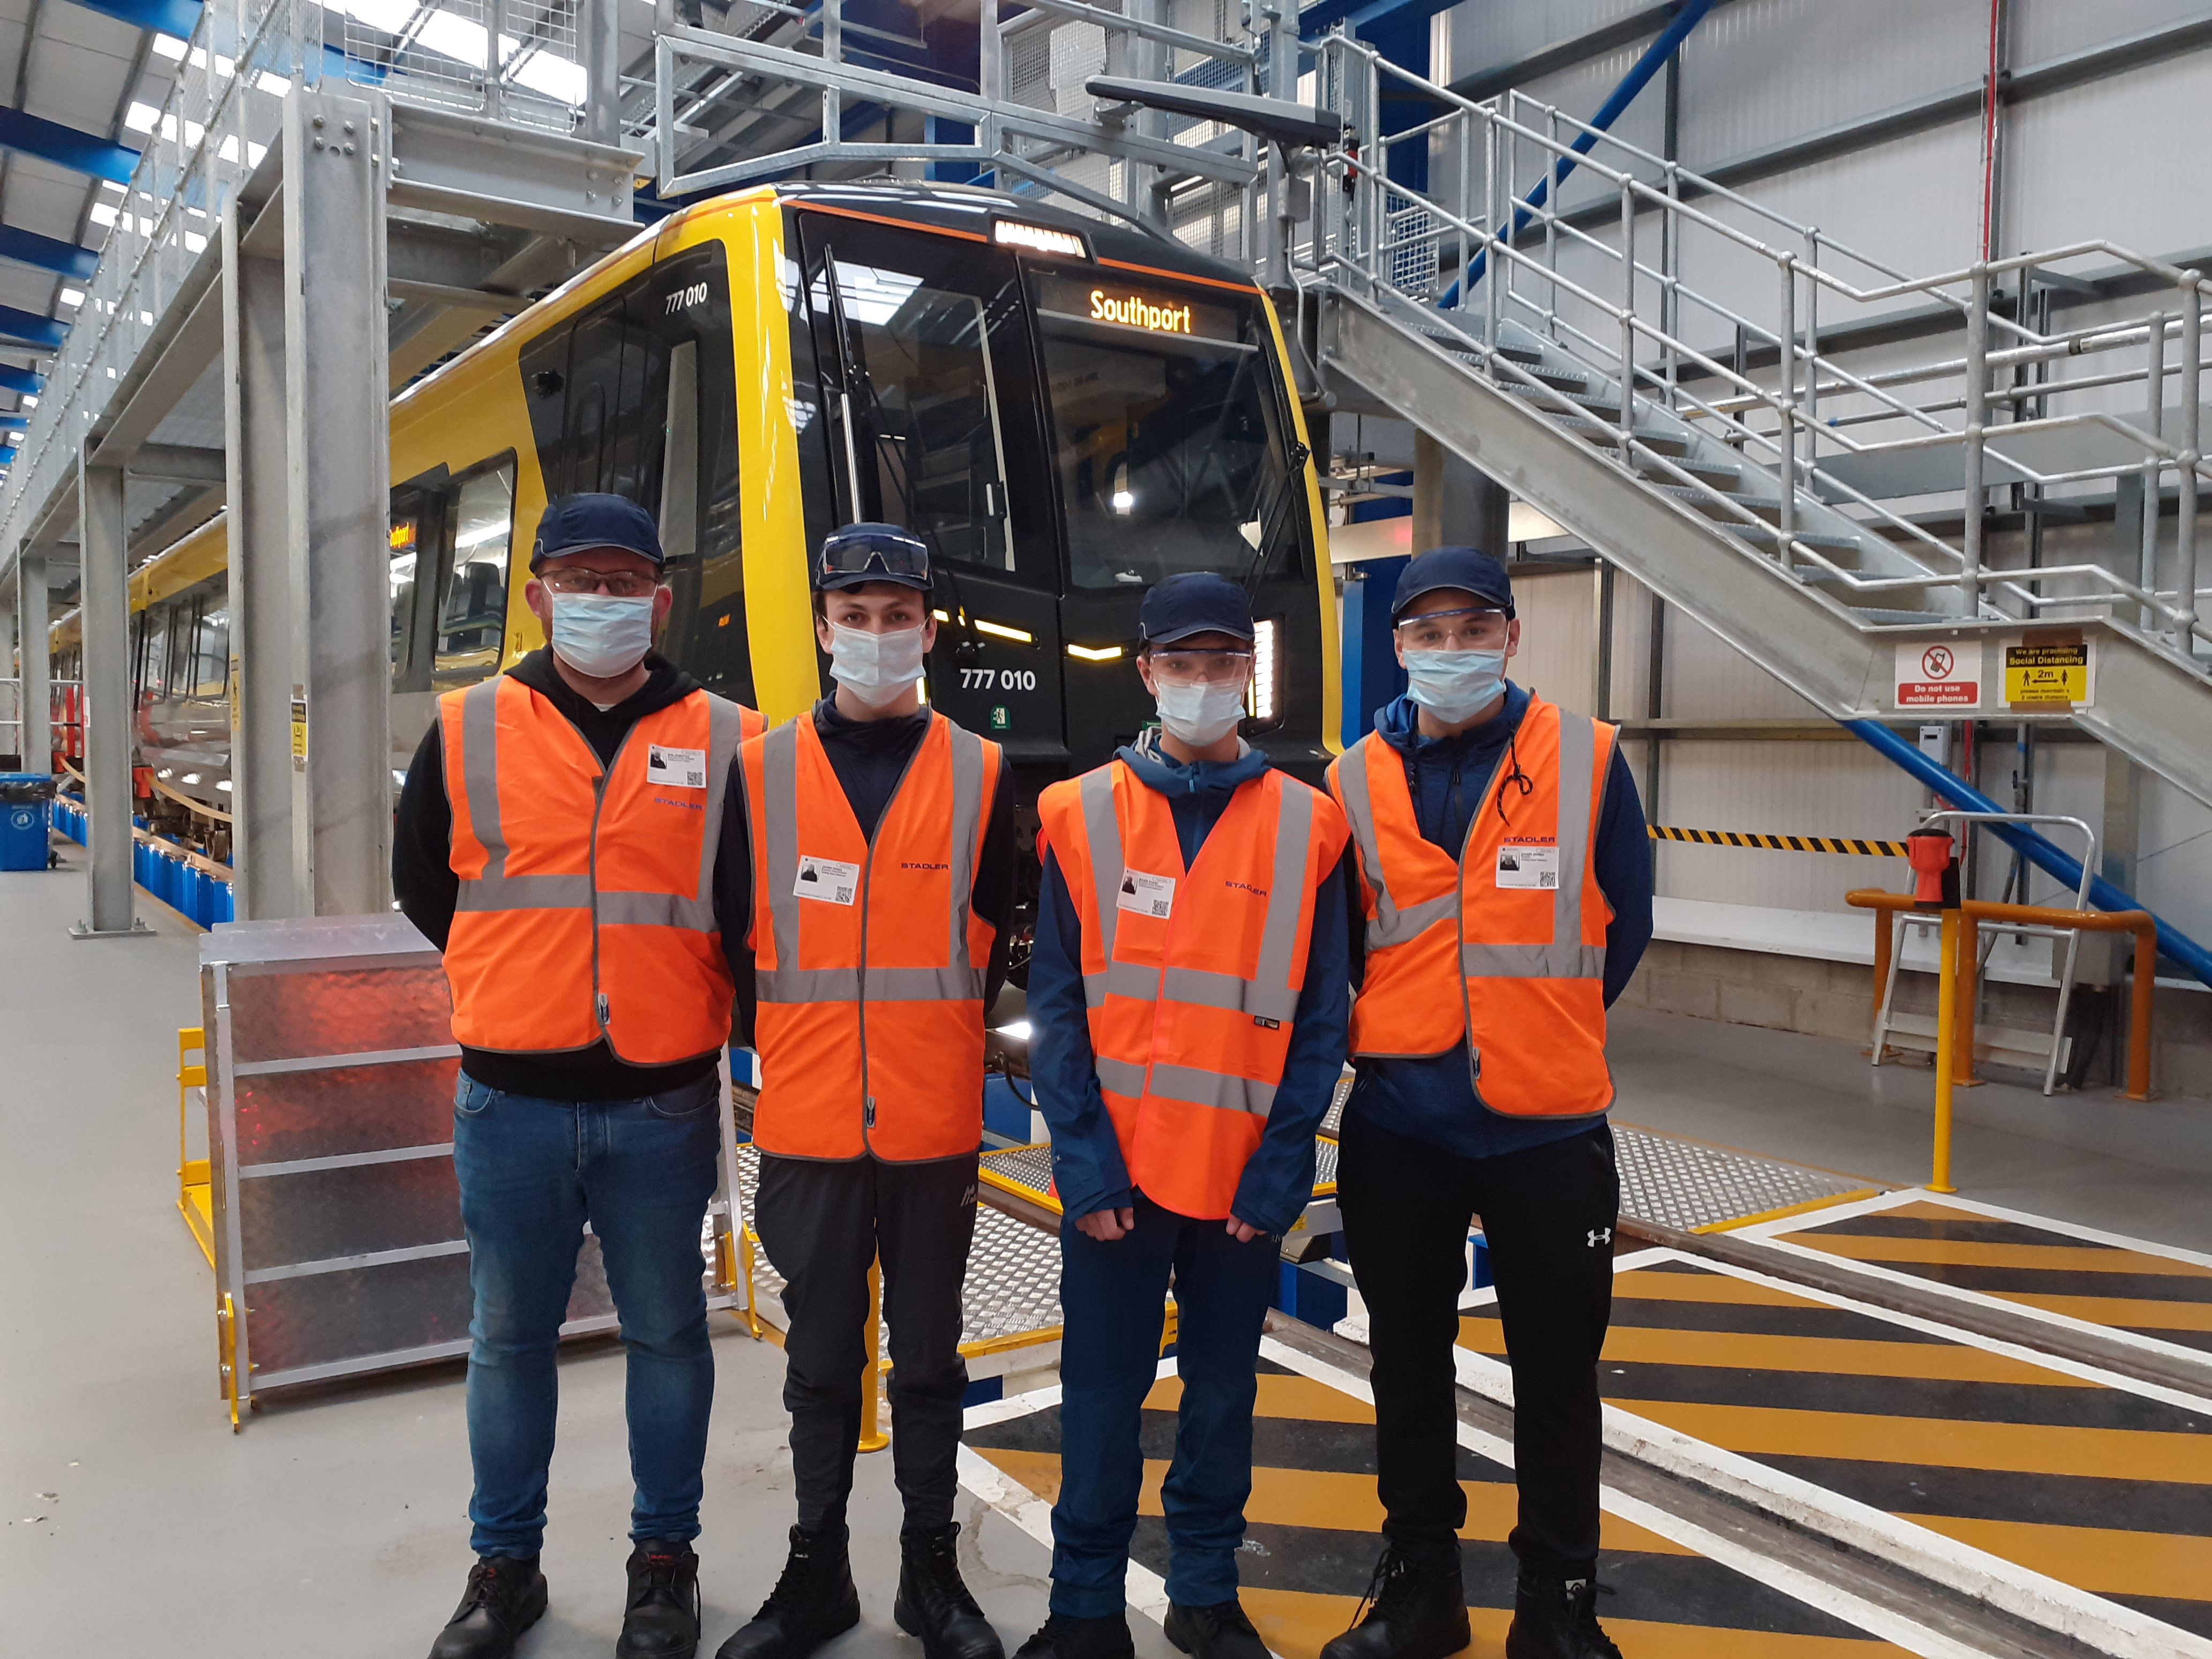 Students standing in fron of a new 777 train. 